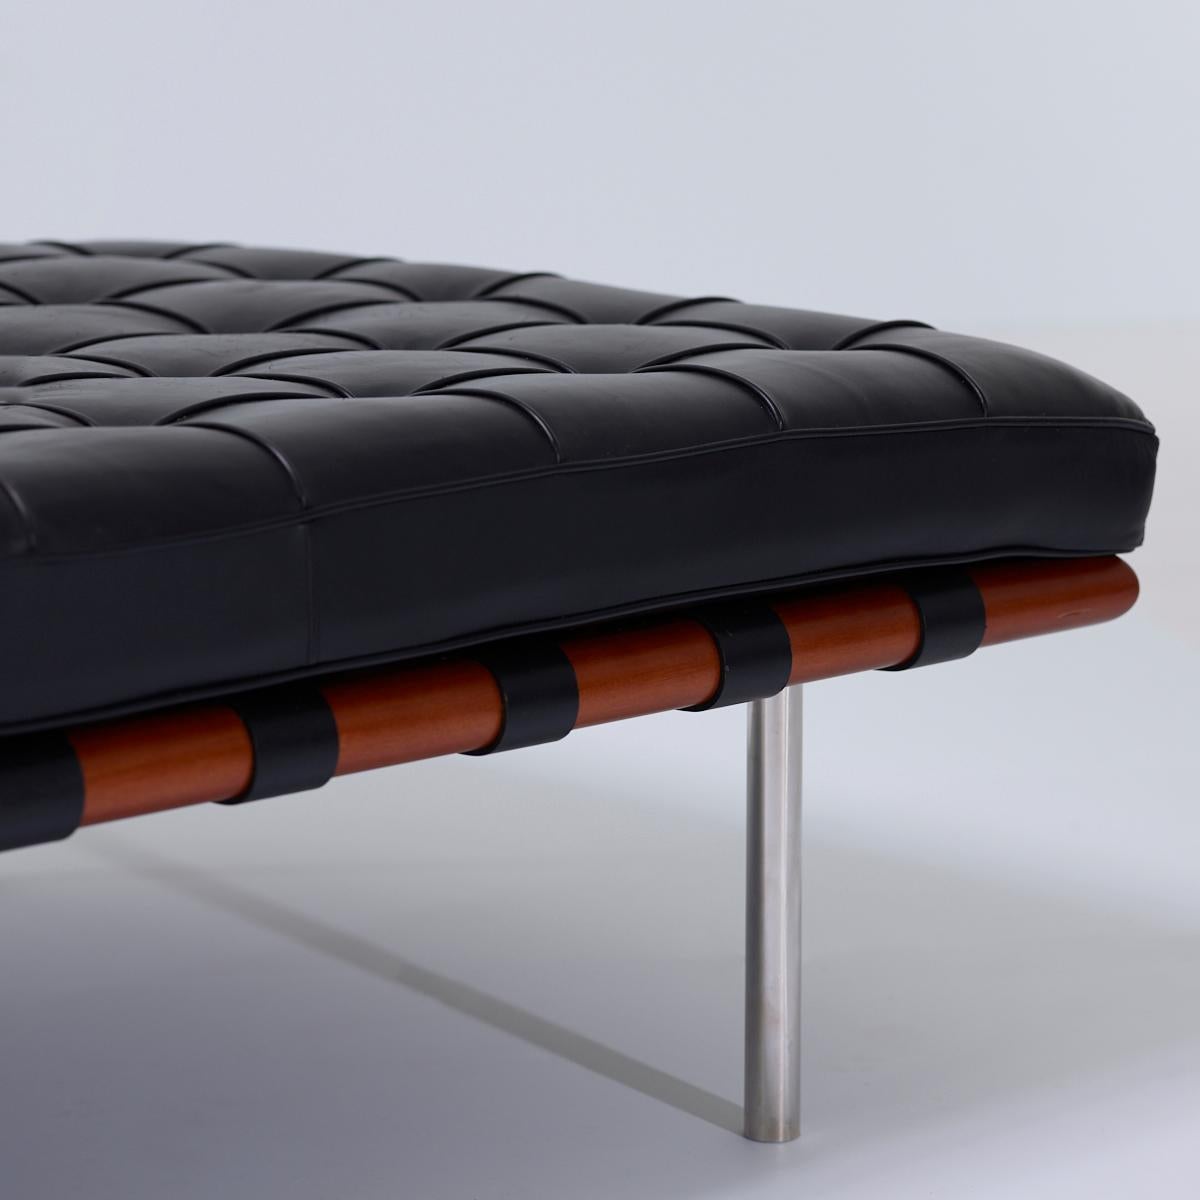 North American Ludwig Mies van der Rohe Barcelona Daybed for Knoll